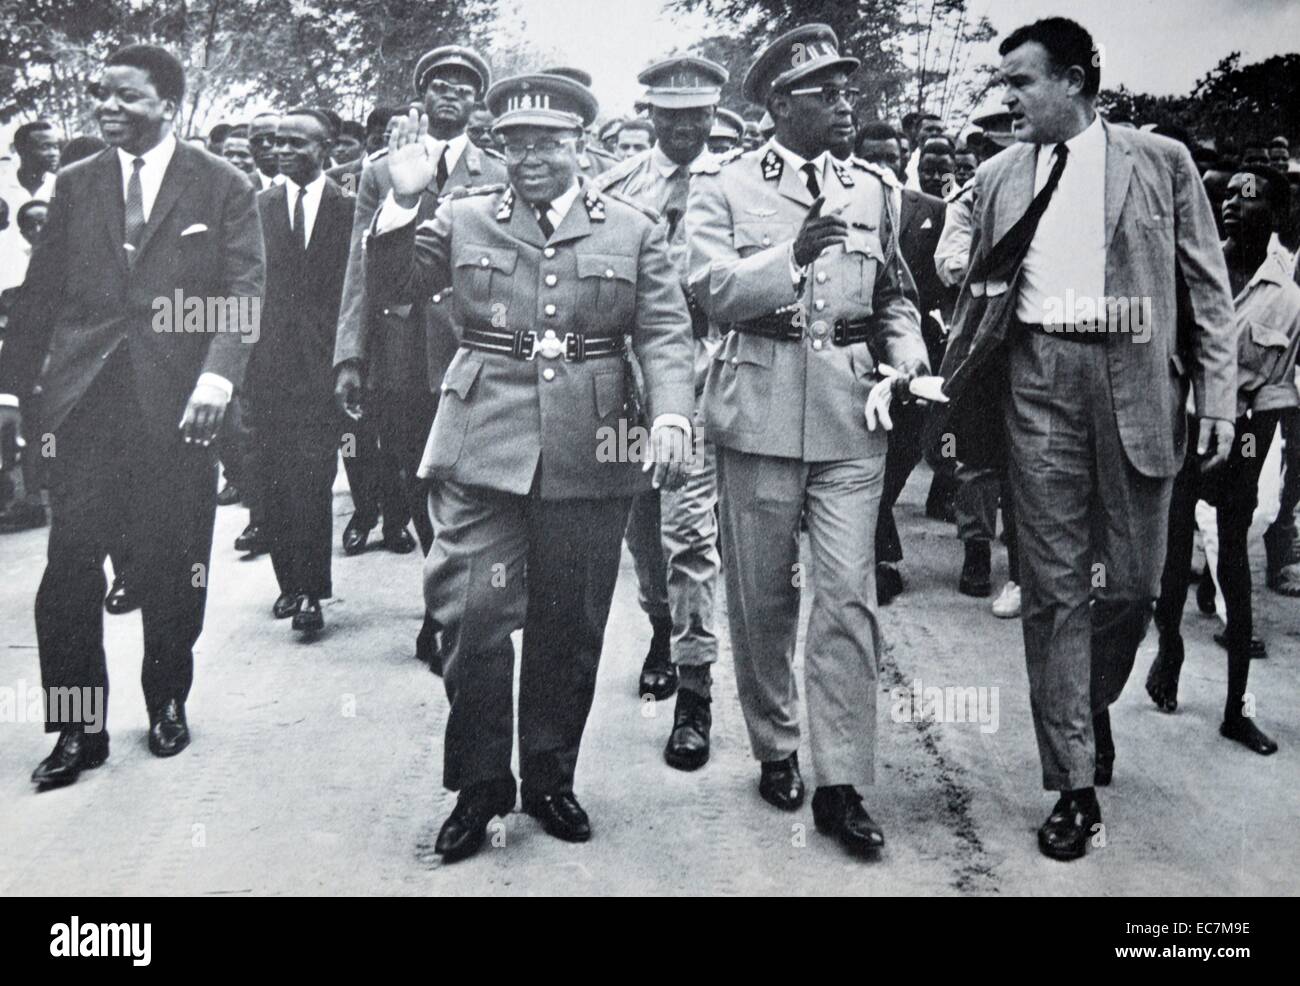 Coalition formed to govern the Congo 1963. Leaders march through the capital to show unity.Moise tshombe (left), Joseph Kasavubu (centre) and Joseph Mobutu (2nd from right). Stock Photo